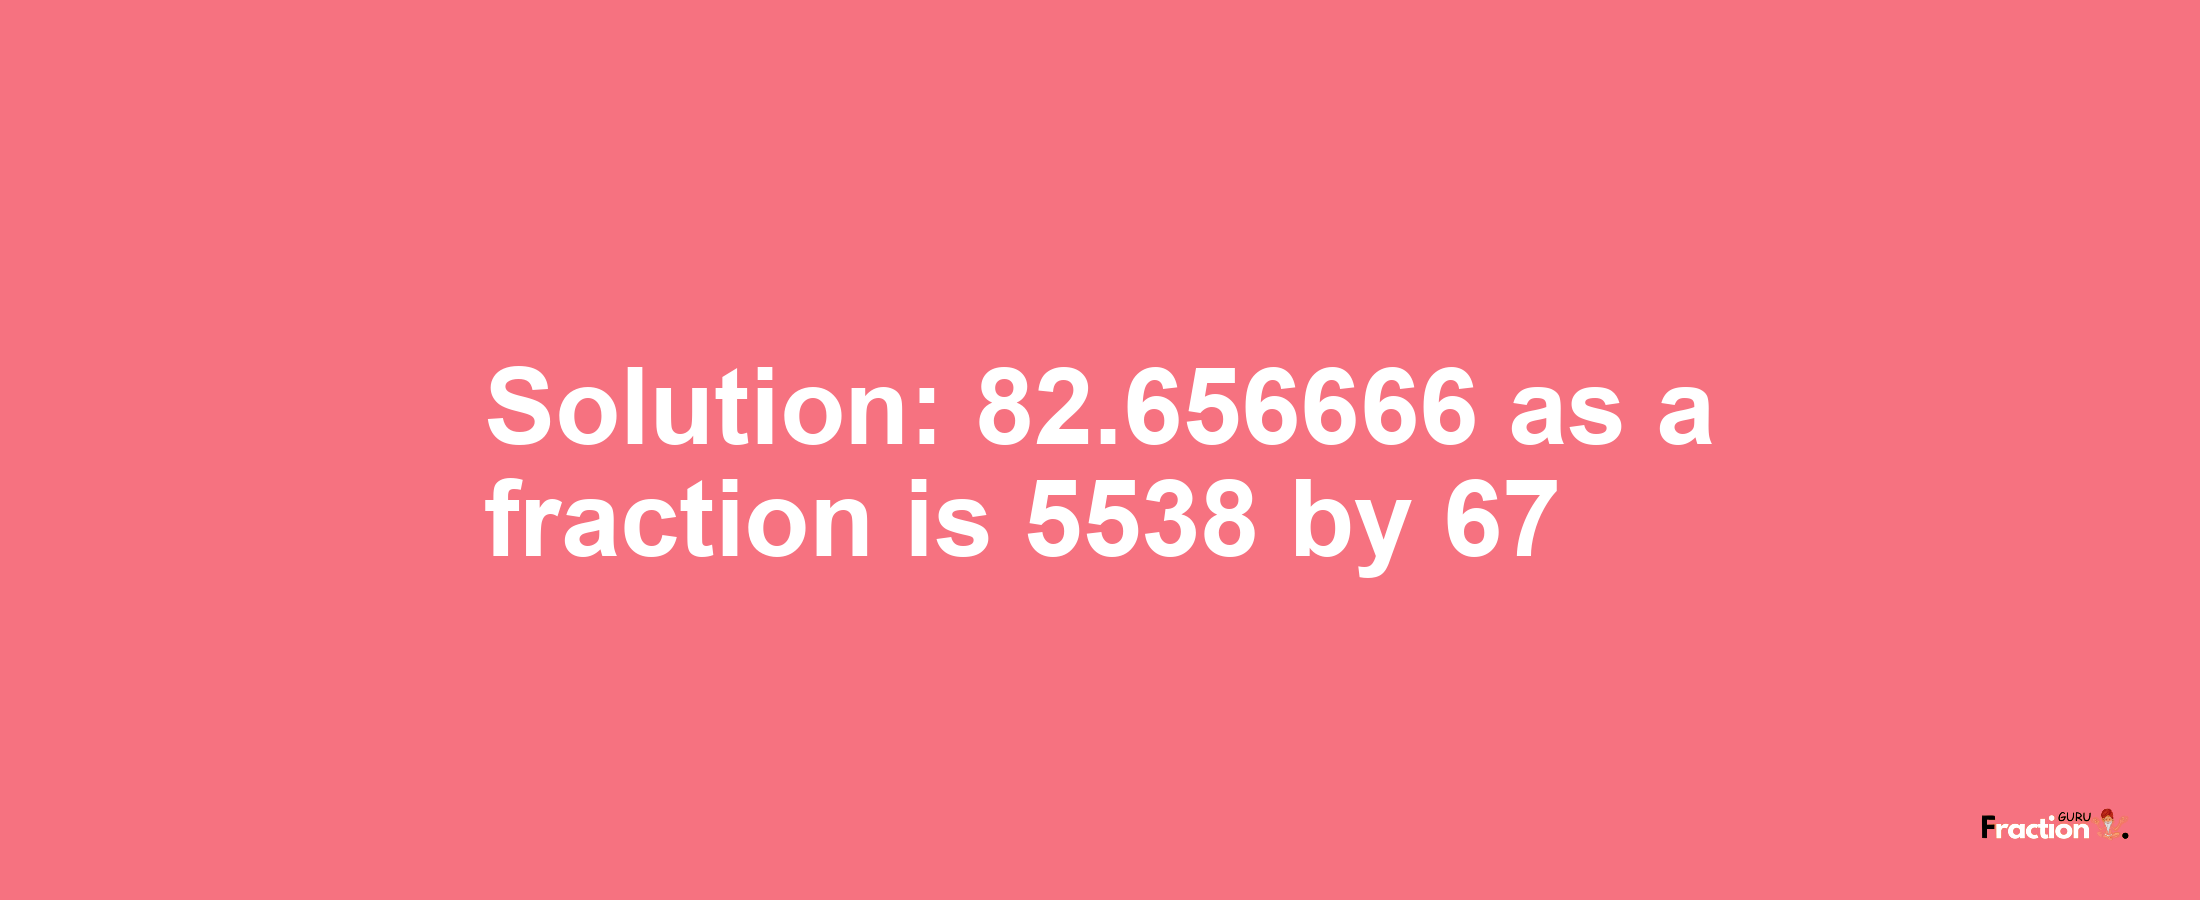 Solution:82.656666 as a fraction is 5538/67